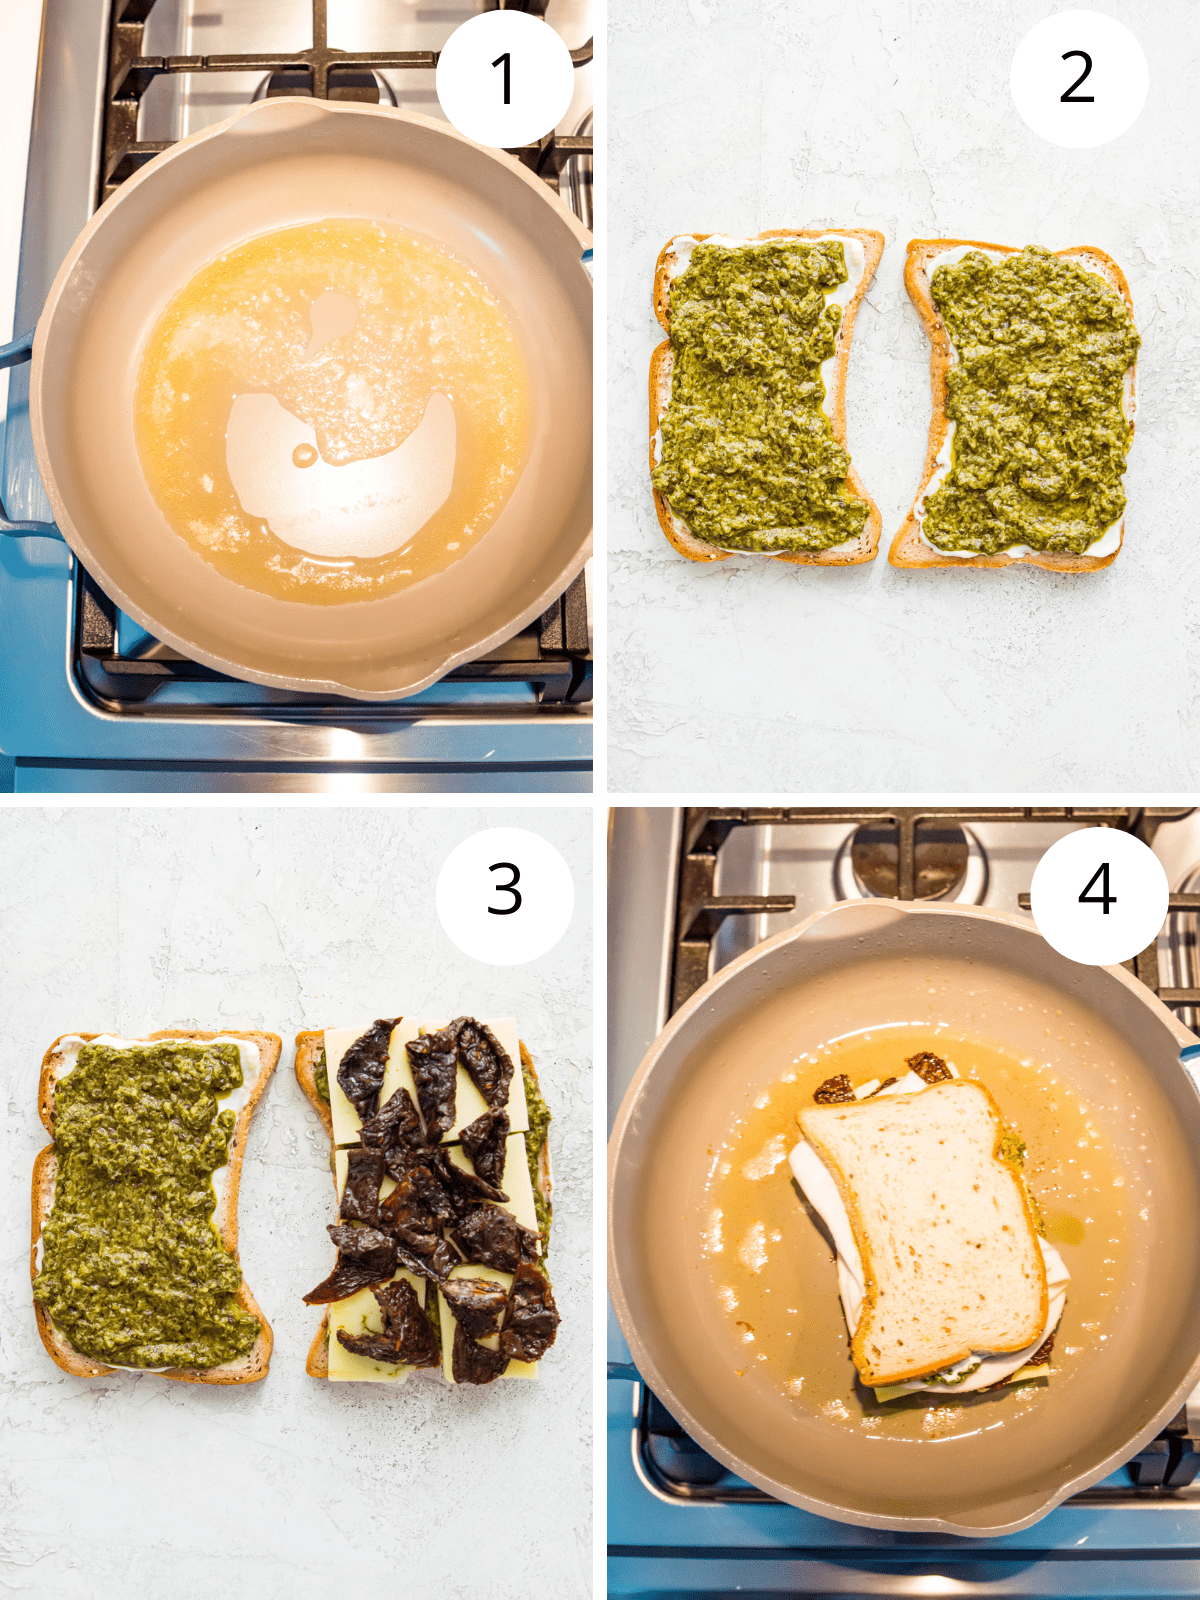 Step by step directions for making a turkey pesto sandwich.